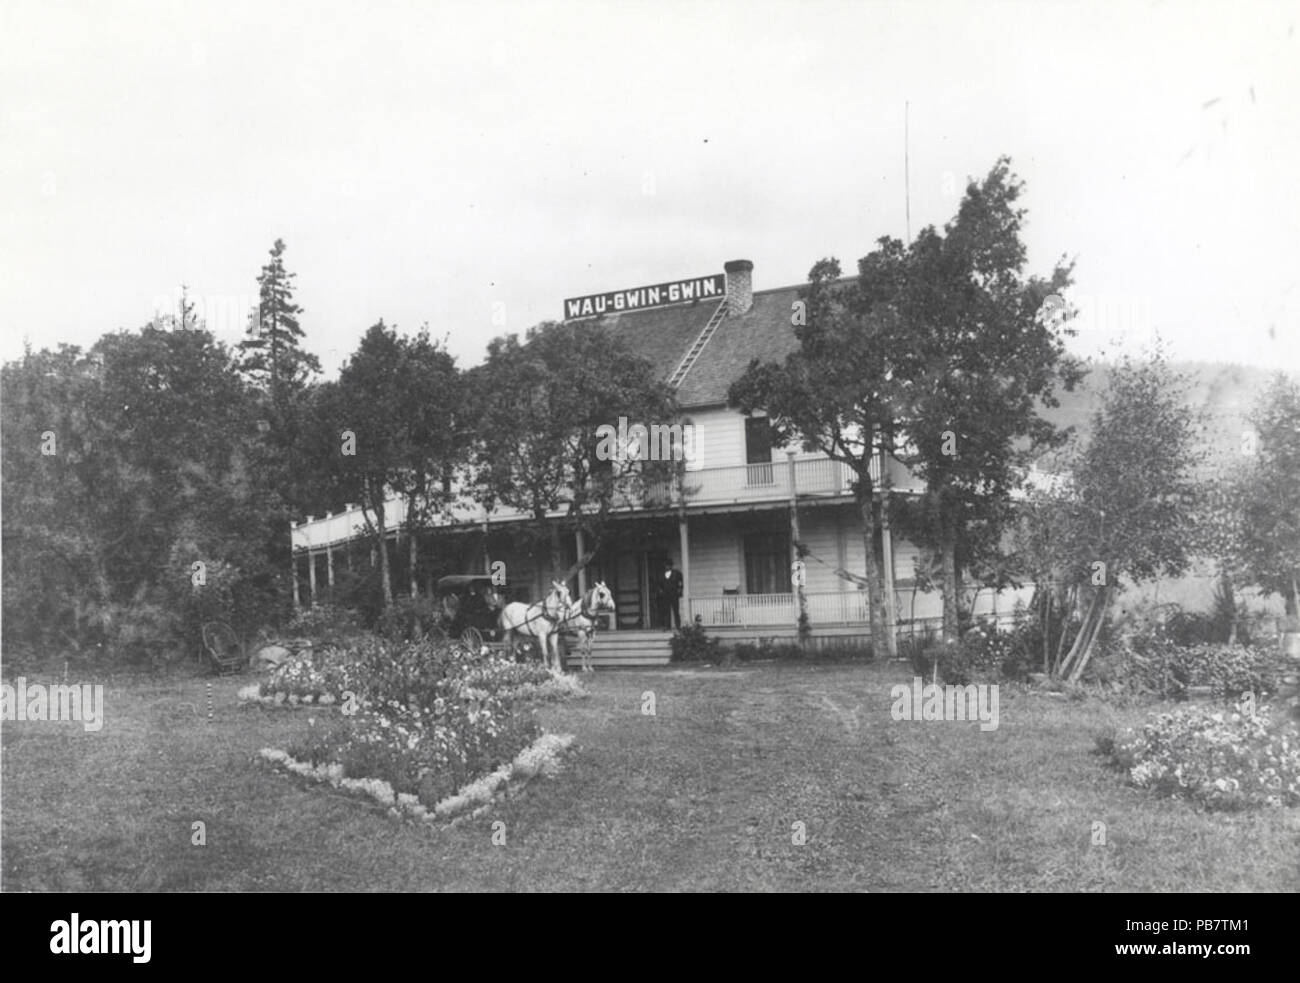 . English: Wau Gwin Gwin Hotel on the south shore of the Columbia River, picture taken before its demolishing in 1921. See images from the history museum of hood river county . 1921 or before 1828 Wah Gwin Gwin Hotel Stock Photo